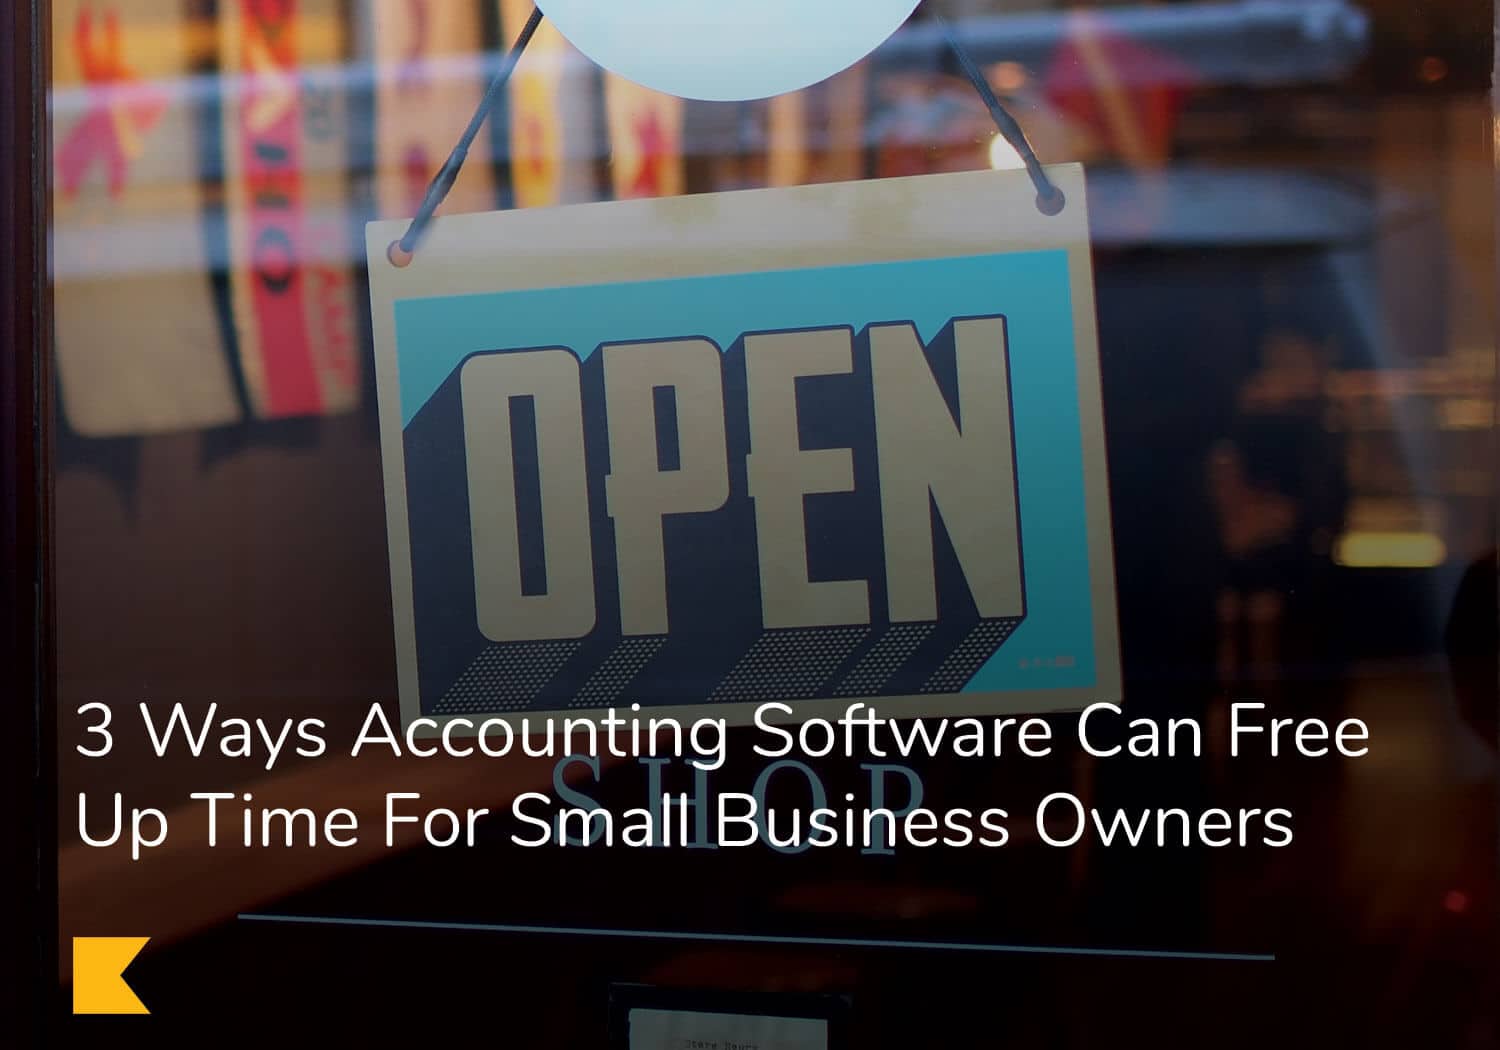 3 Ways Accounting Software Can Free Up Time For Small Business Owners